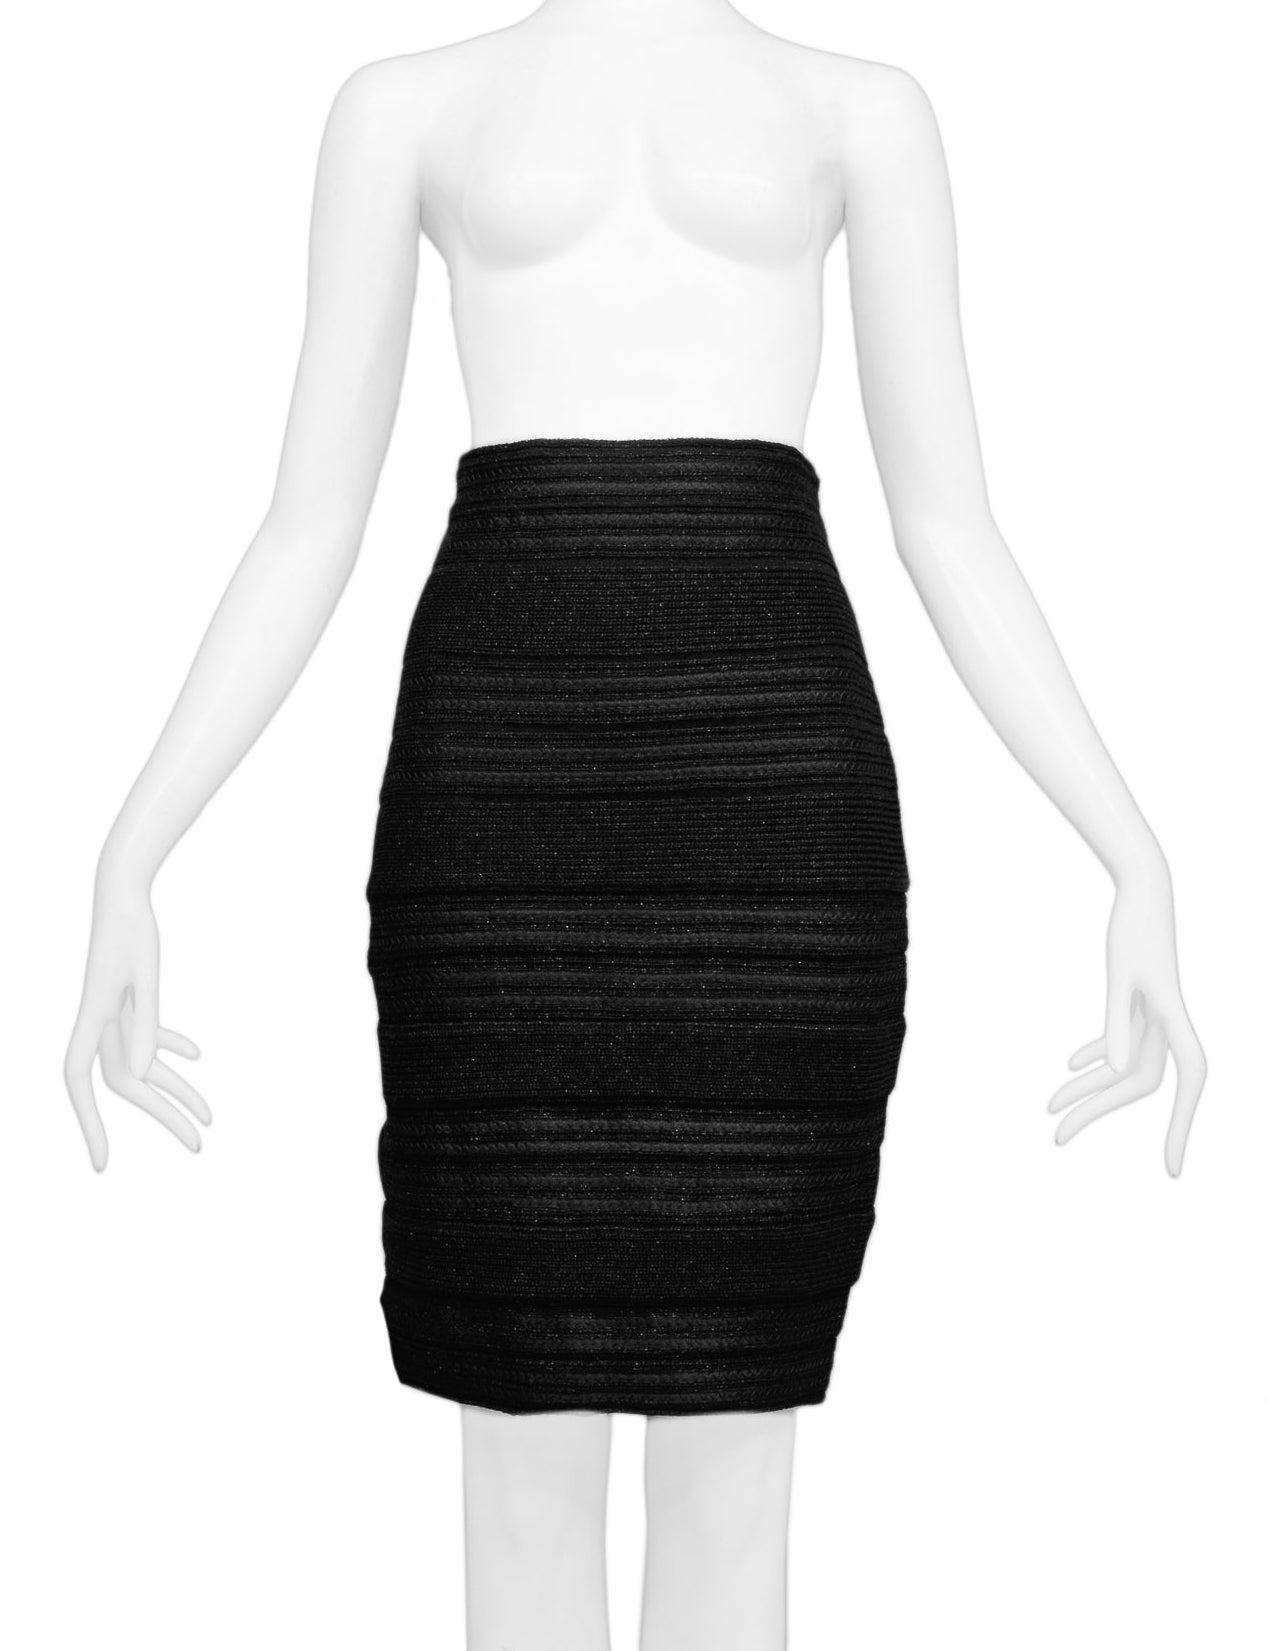 Gianfranco Ferre Black High Waist Striped Knit Skirt In Excellent Condition For Sale In Los Angeles, CA